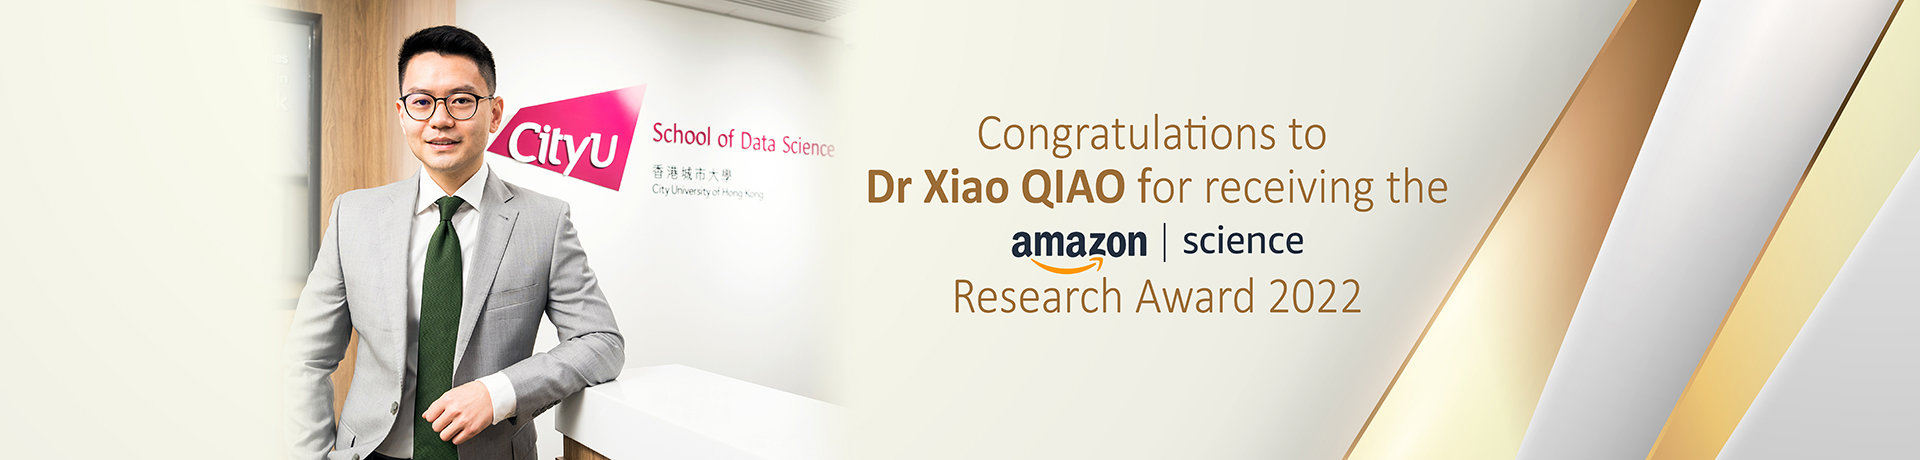 CityU academic is the only awardee from Asian university to receive 2022 Amazon Research Award